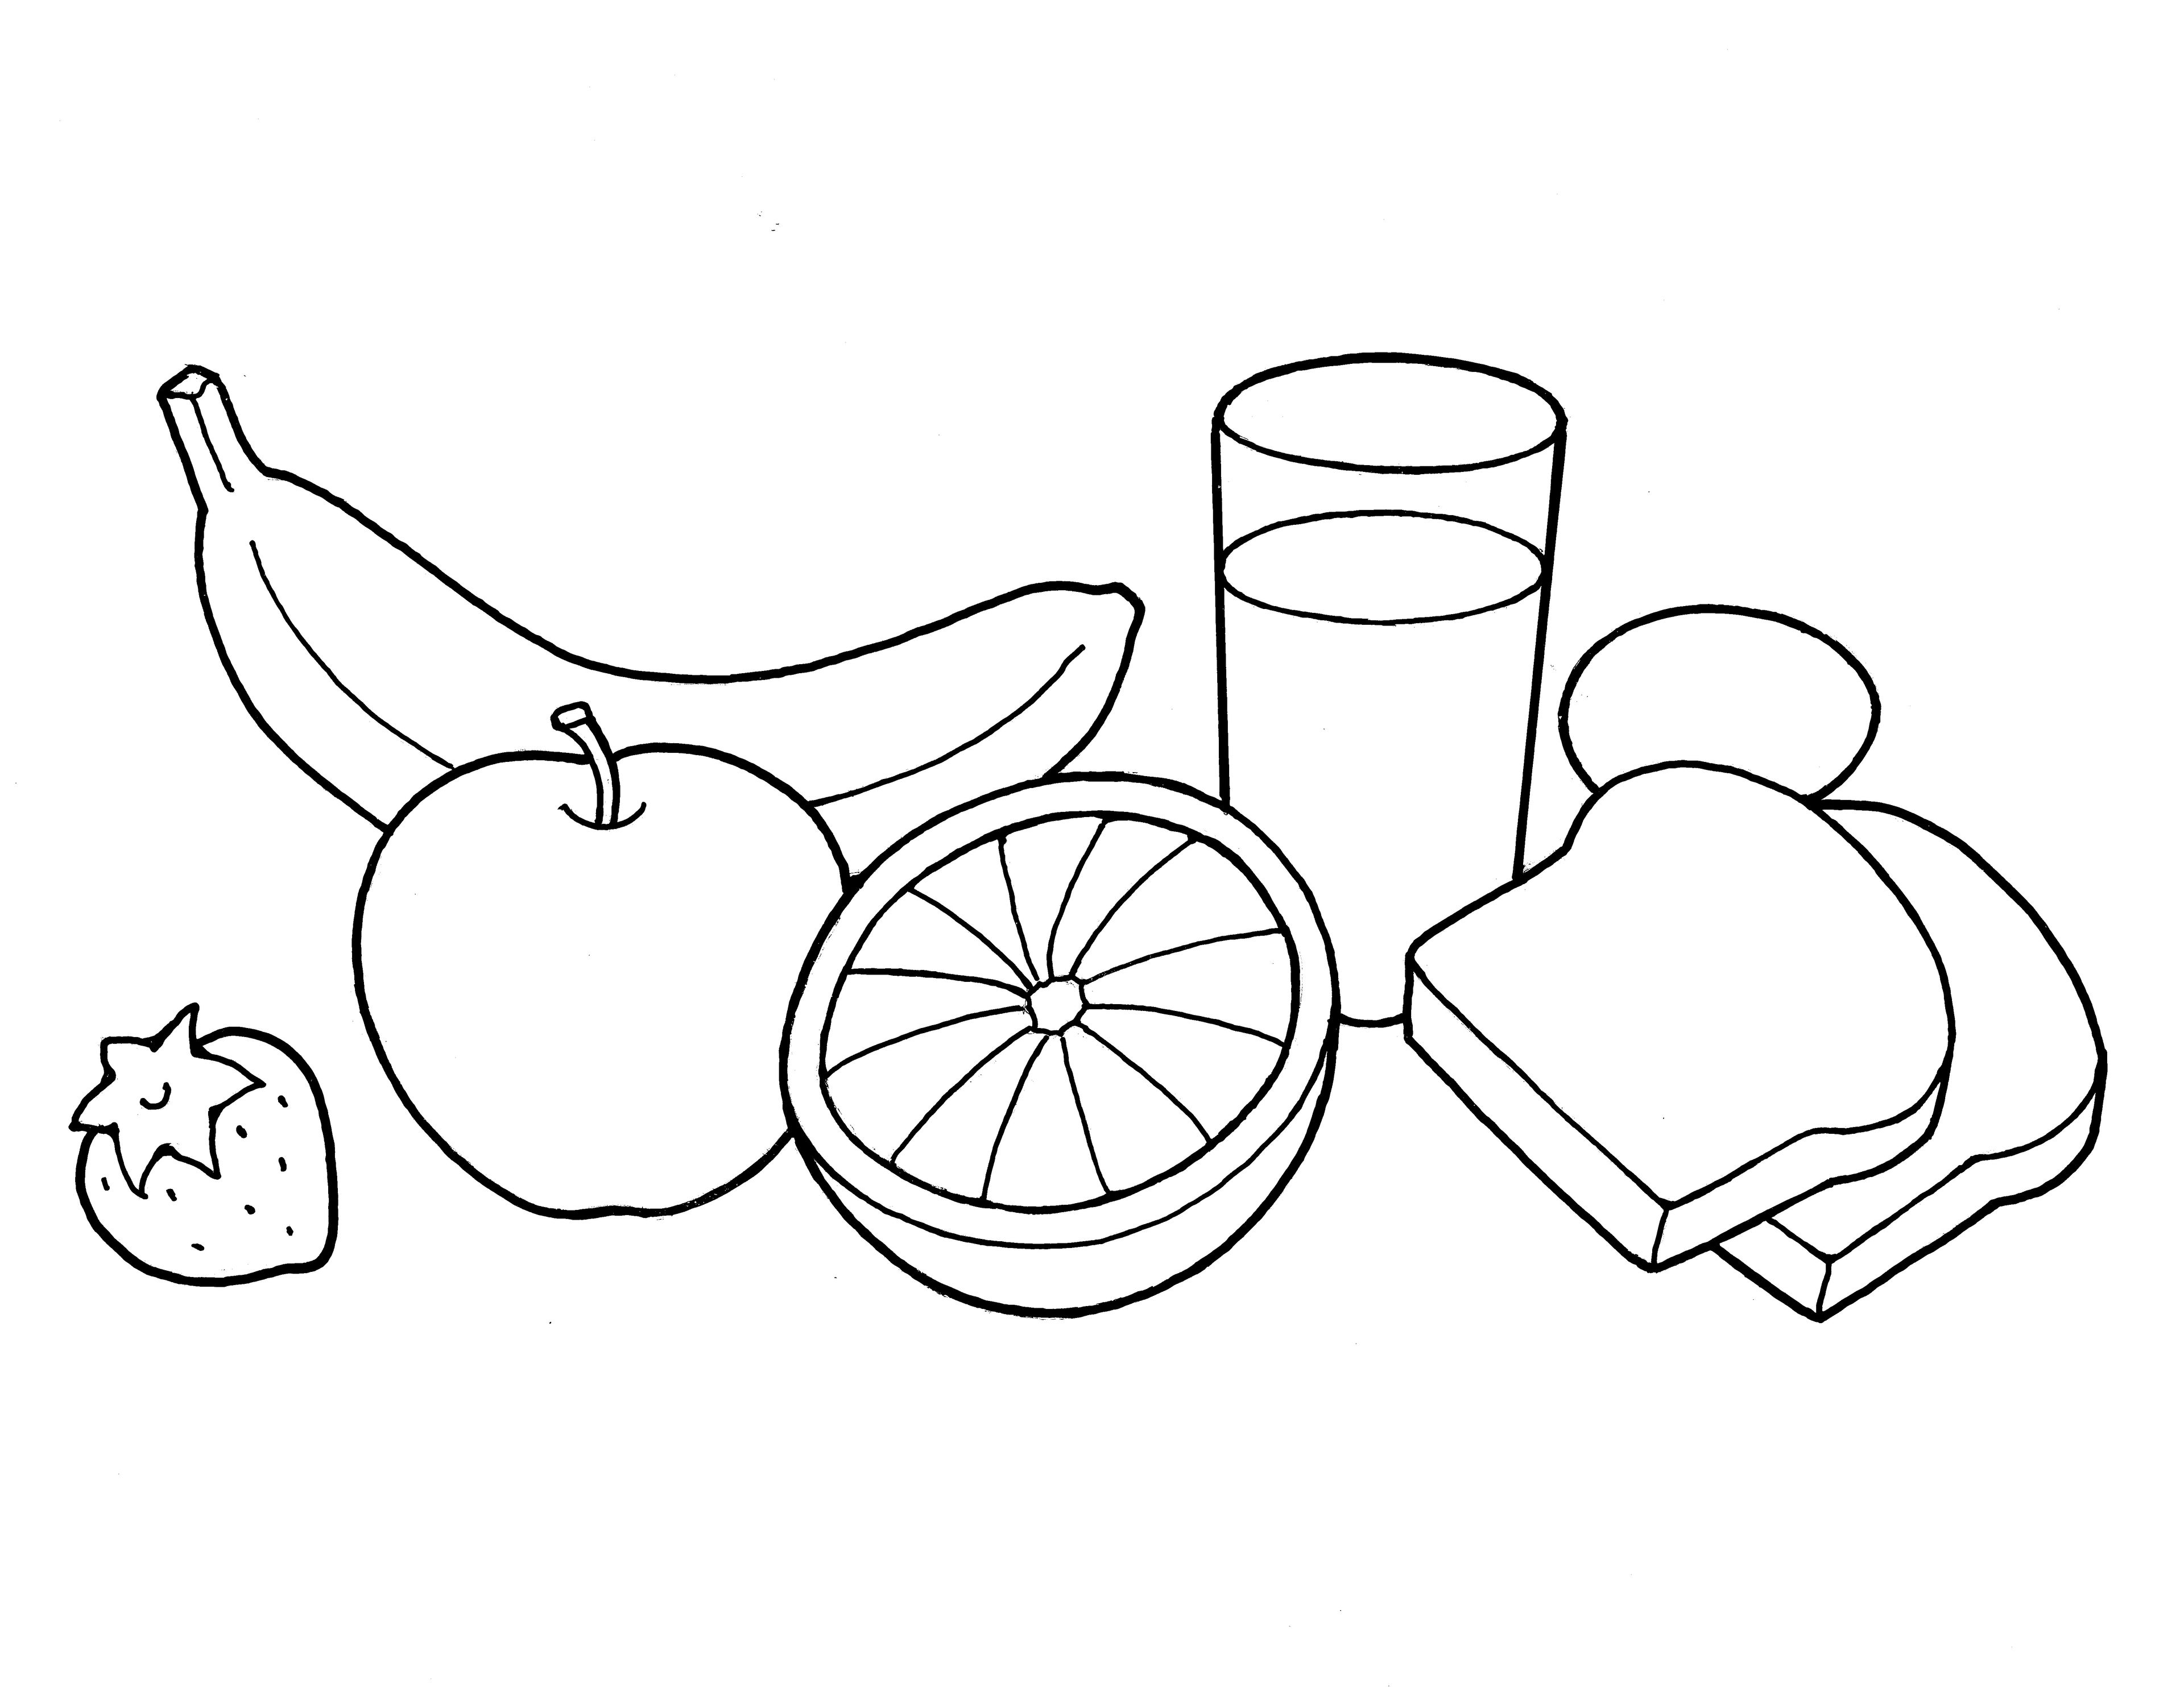 An illustration of food from the nursery manual Behold Your Little Ones (2008), pages 55 and 67.